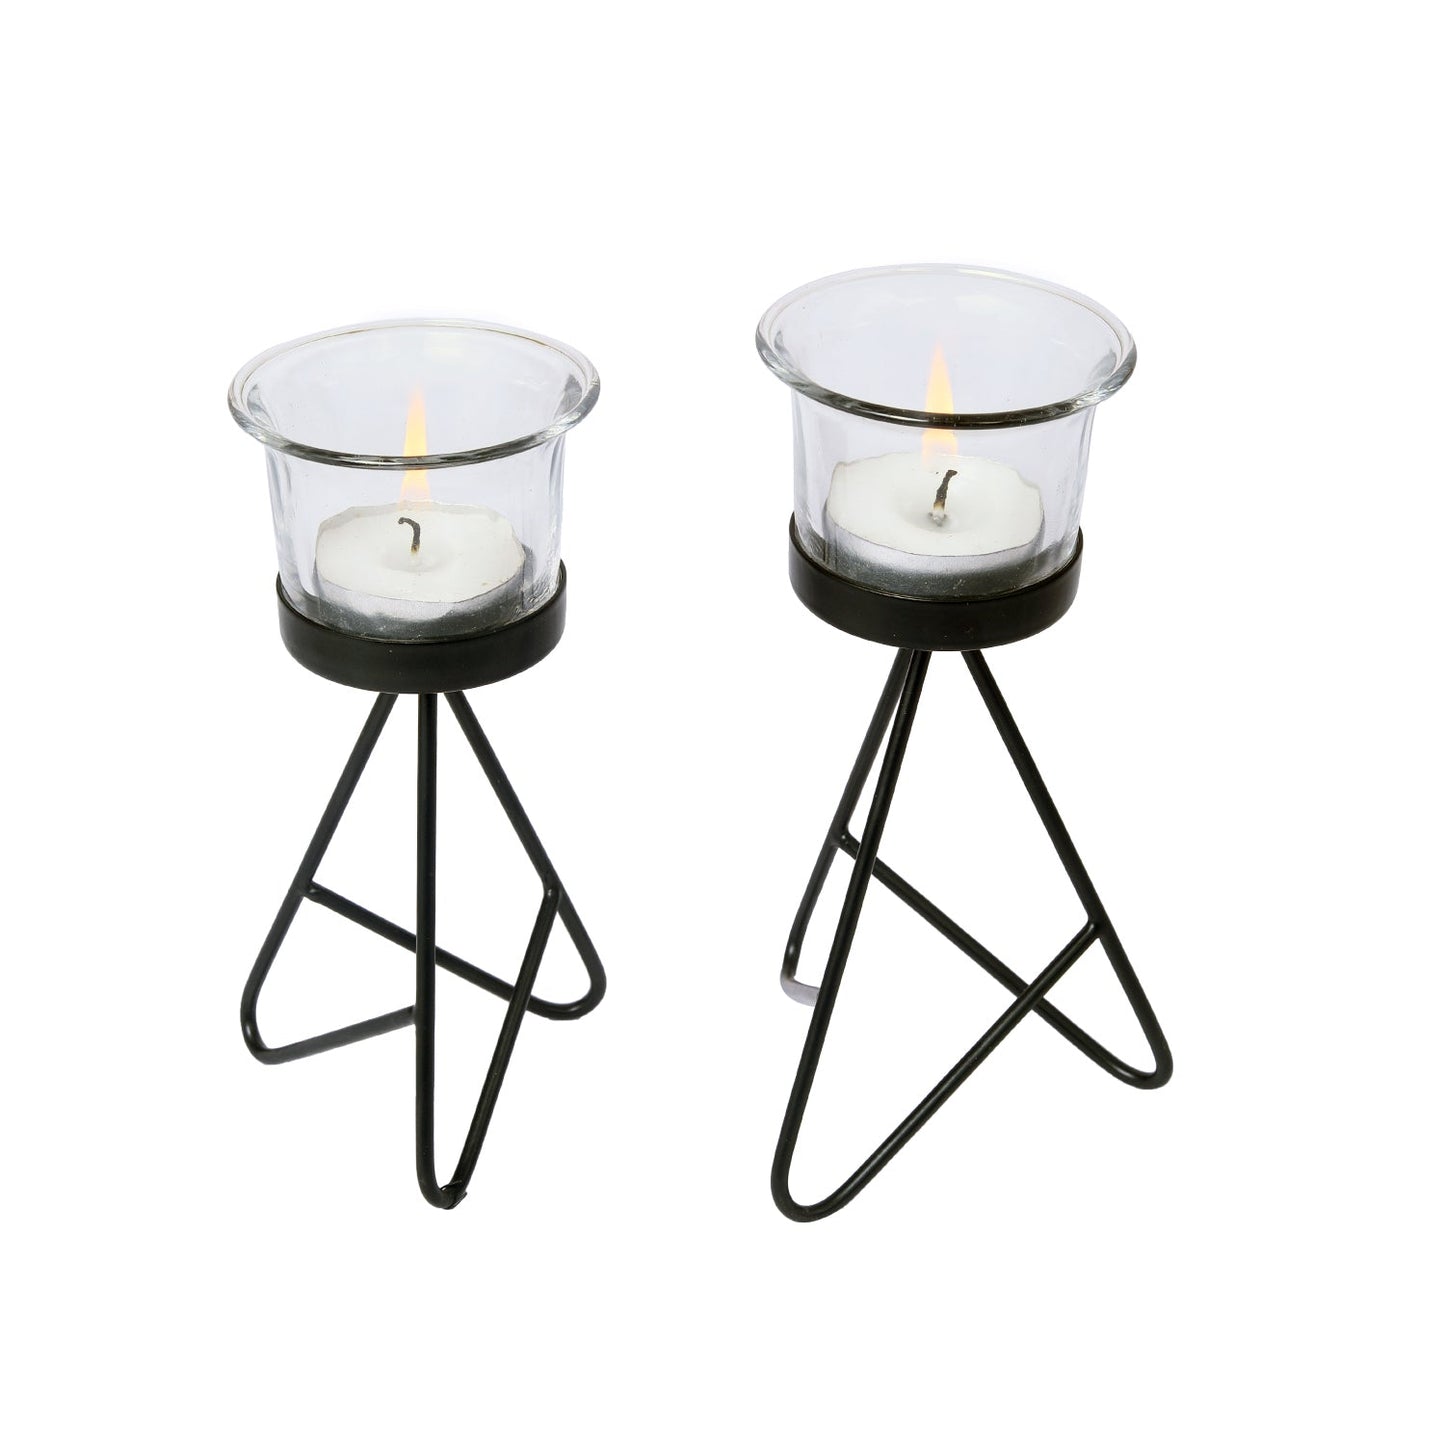 Hosley Metal Candle Holders with 2 Glass / Tealight Candle Holder for Home Decoration Dinning Table, Wedding Décor, Black, Pack of 2